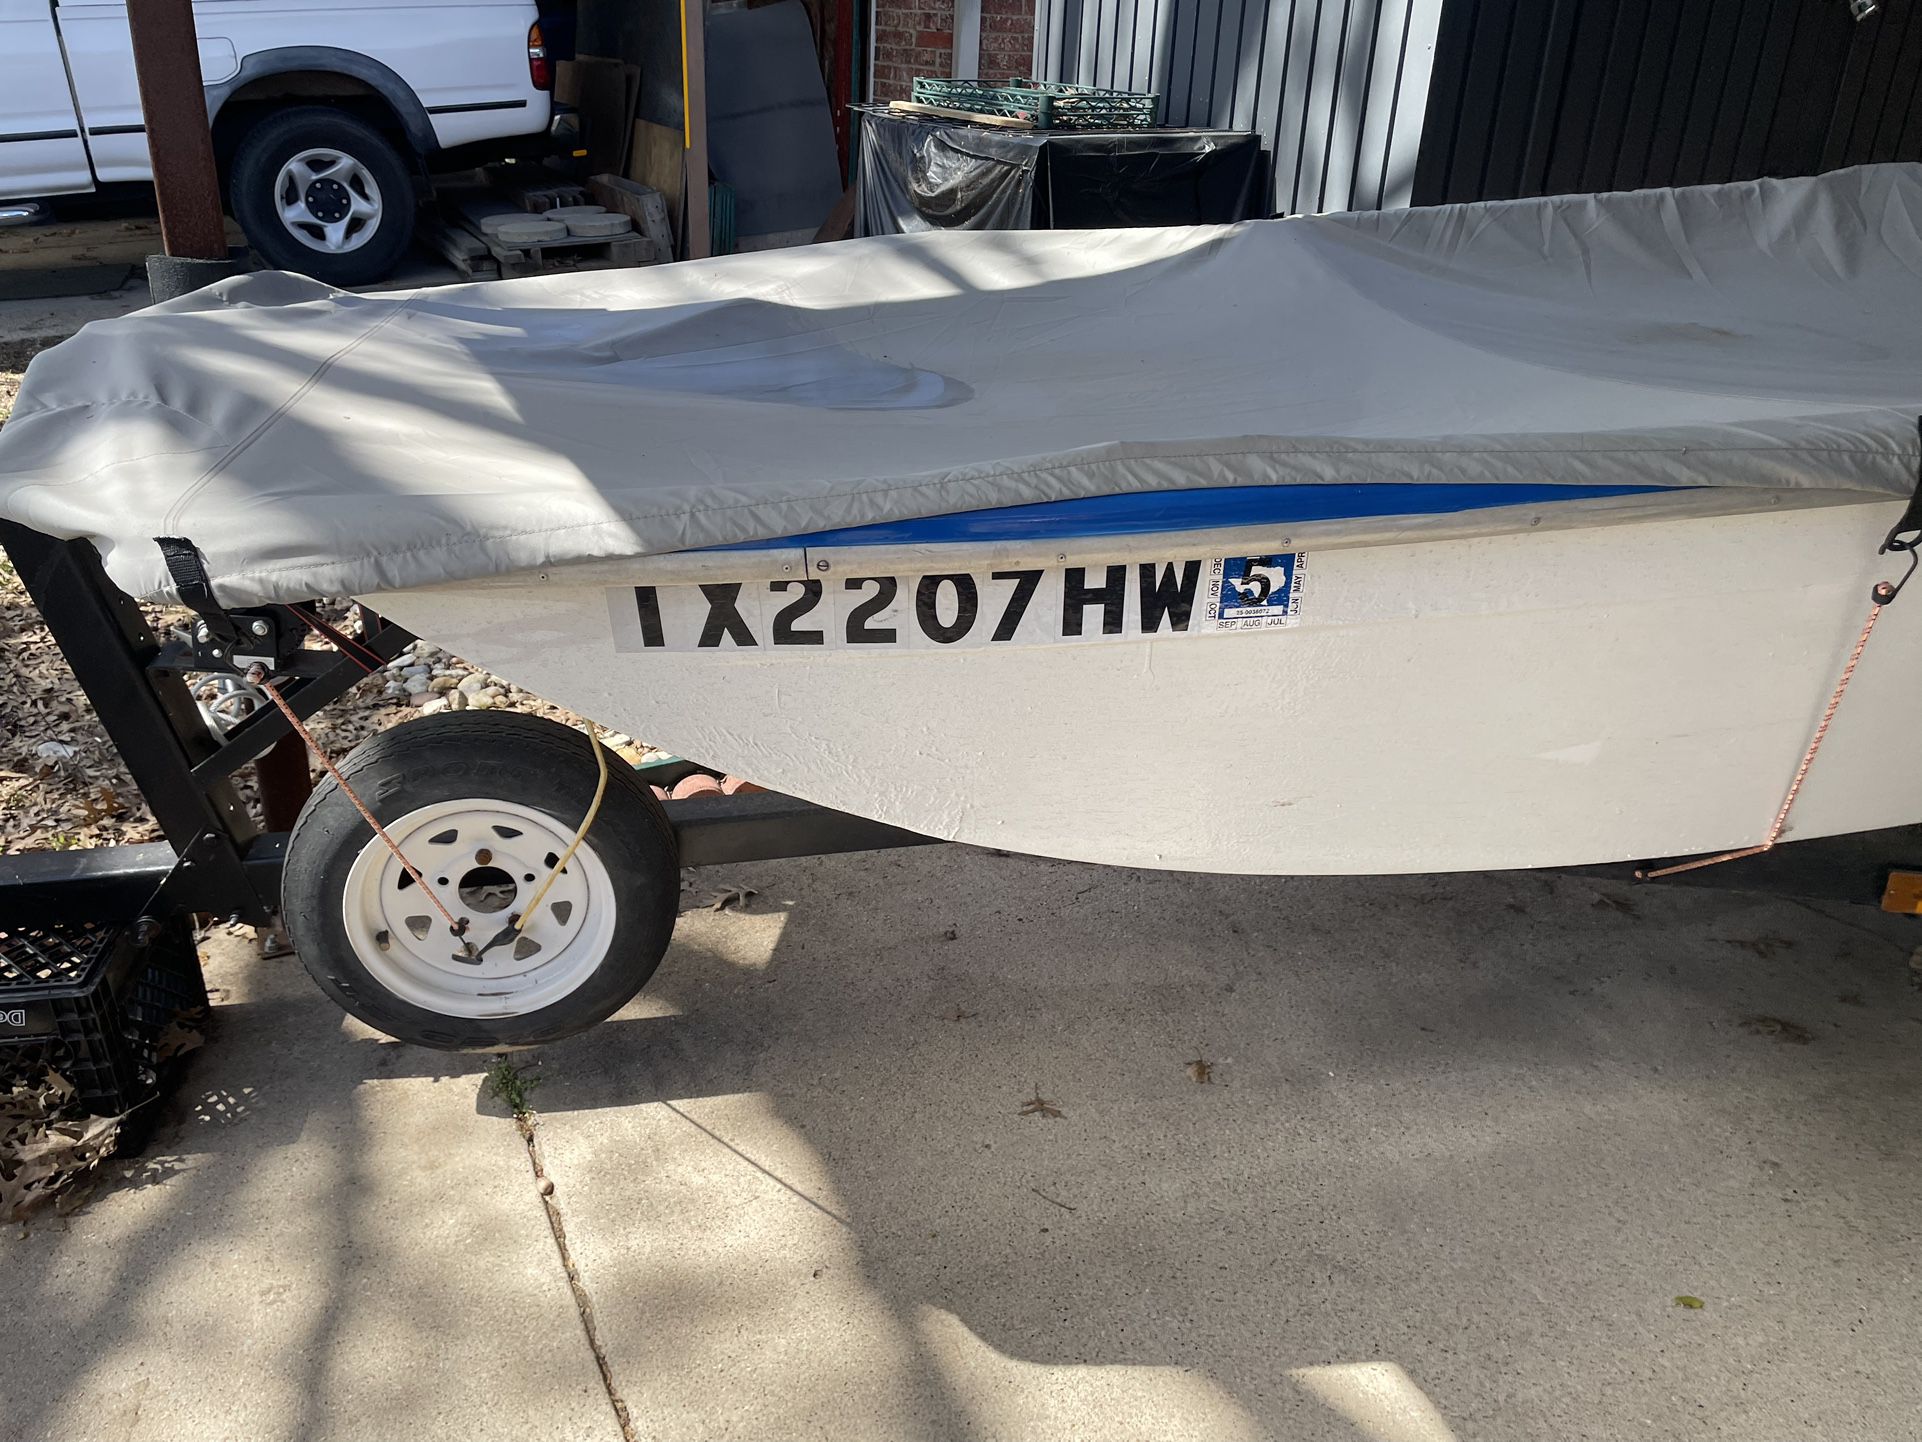 14 Ft Gamefisher, Trailer, 8hp Outboard Mercury Motor